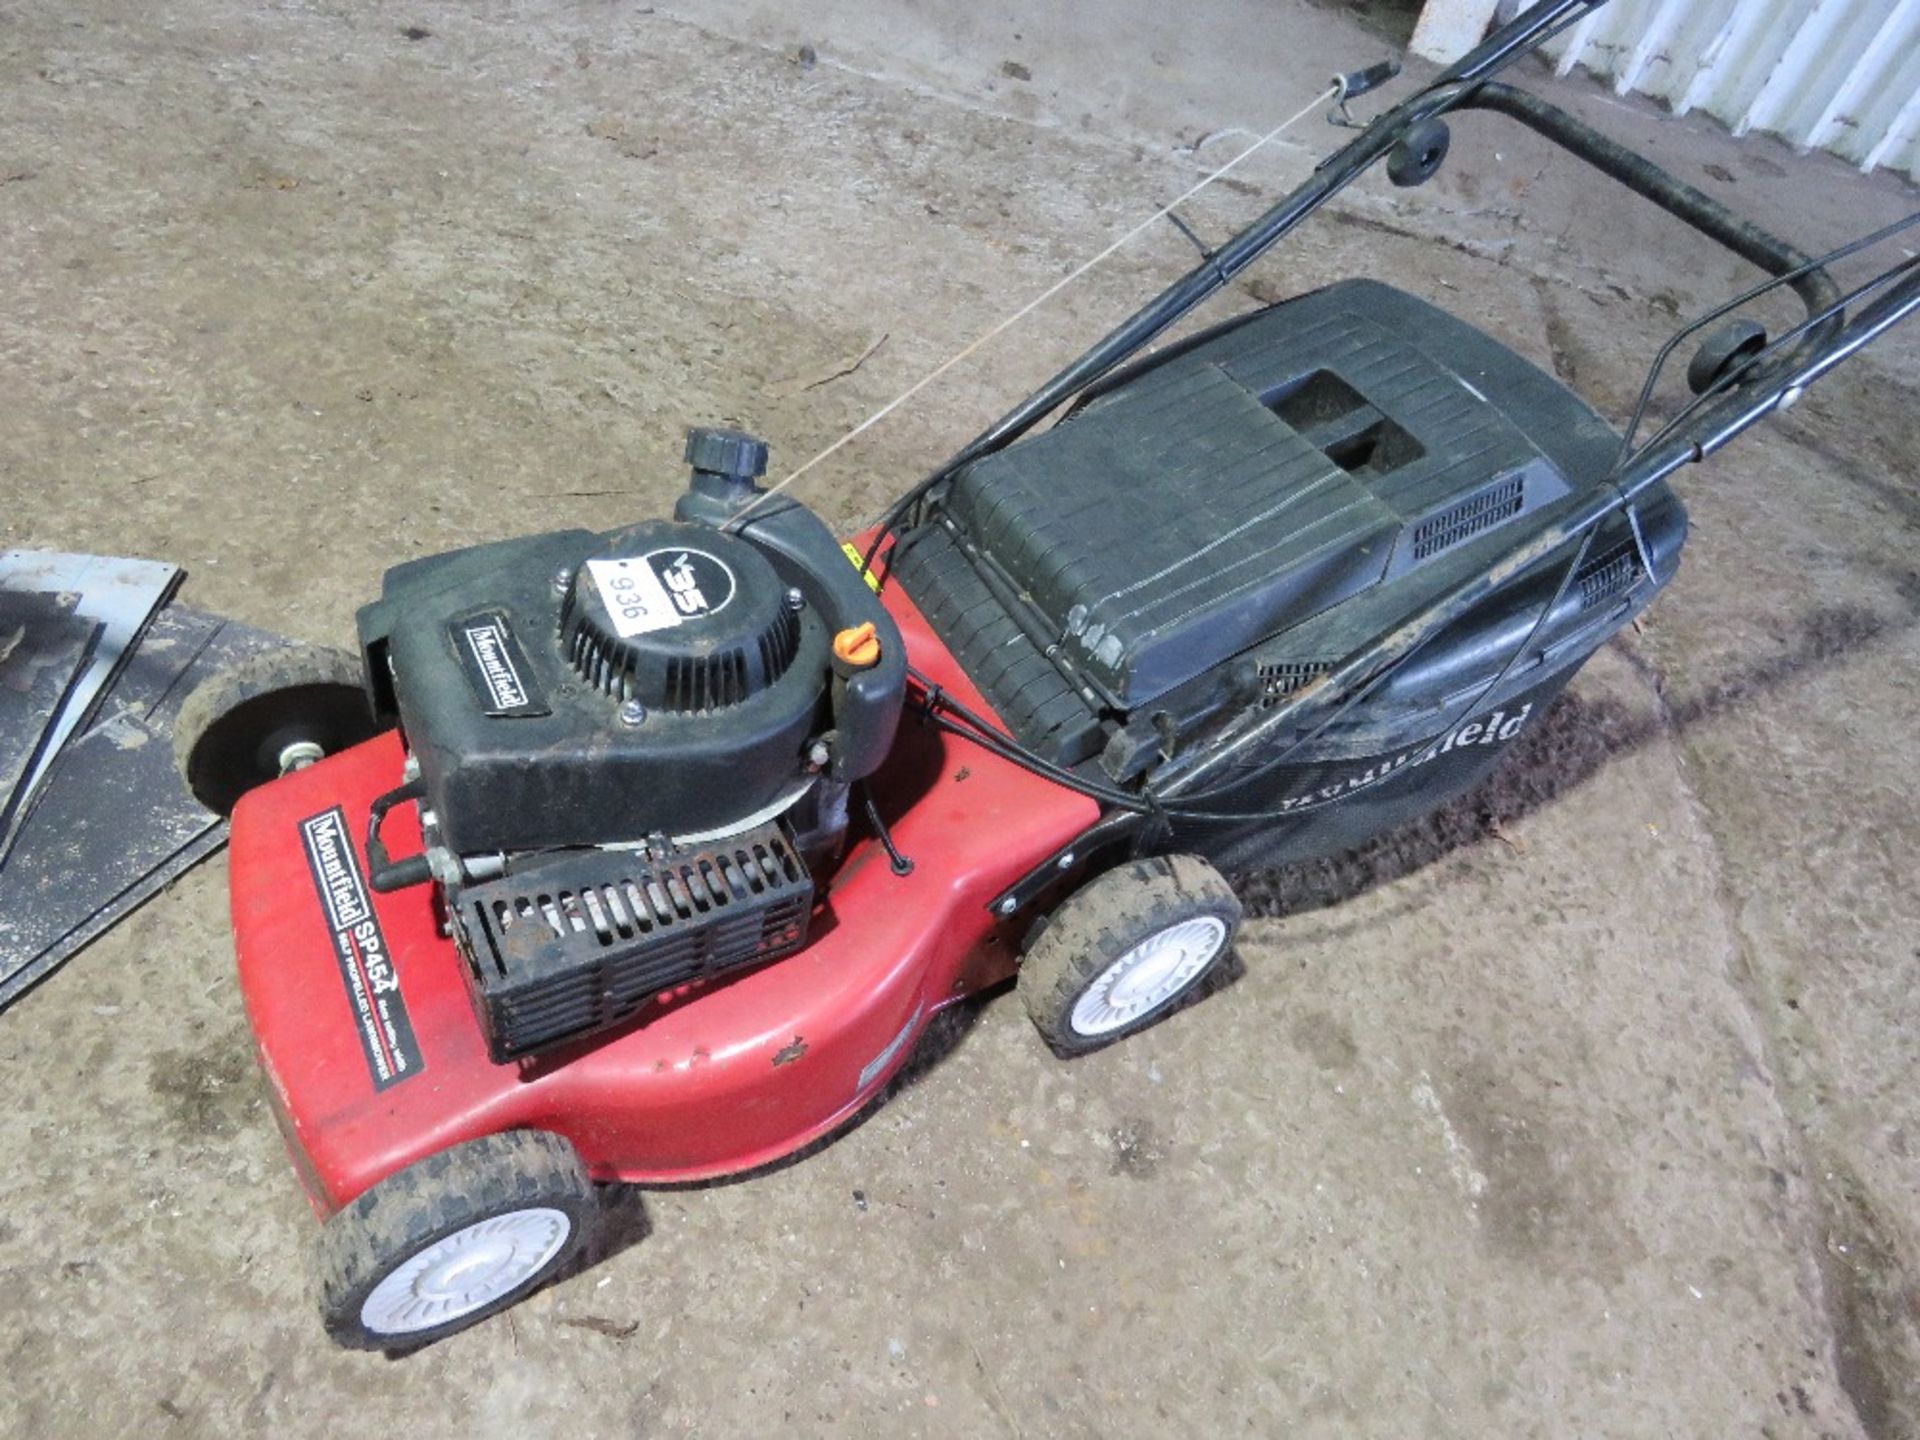 MOUNTFIELD PETROL ENGINED LAWNMOWER WITH A COLLECTOR. - Image 2 of 4